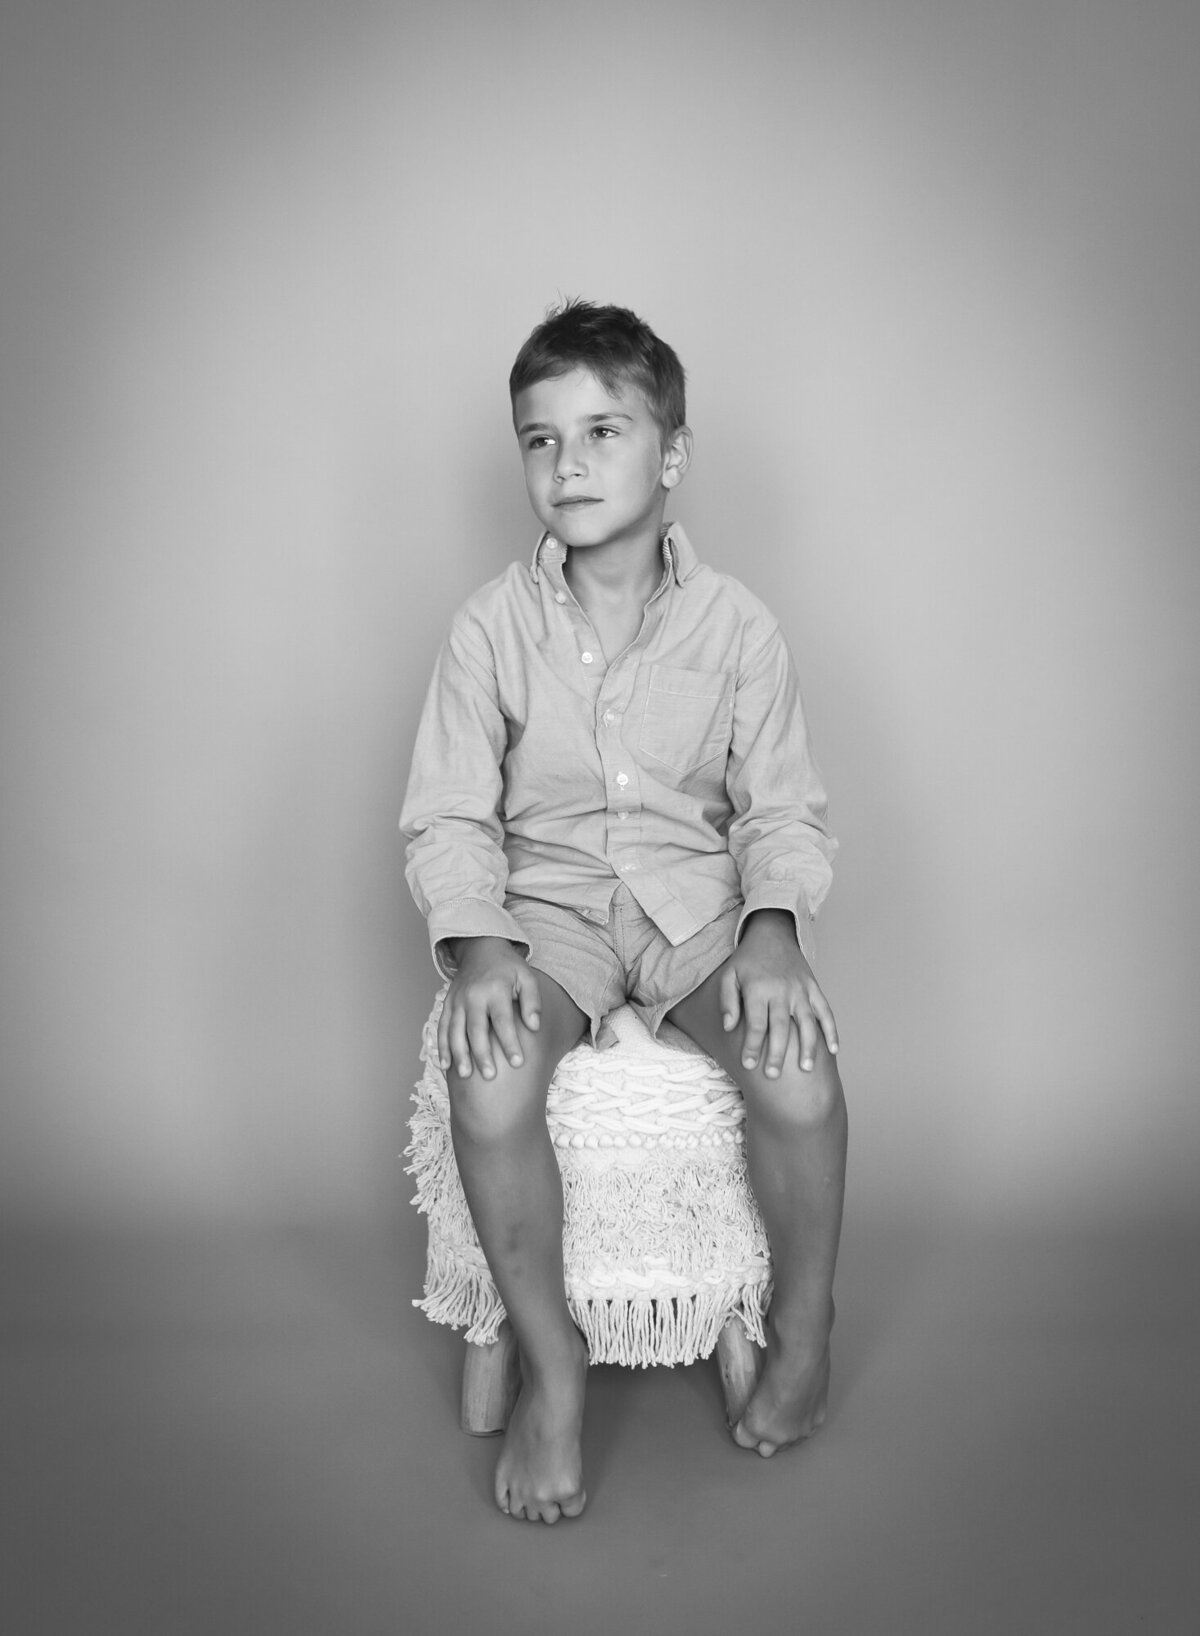 beautiful black and white  soft edit portrait of barefoot boy in dress shirt  sitting on a boho stoll, looking away